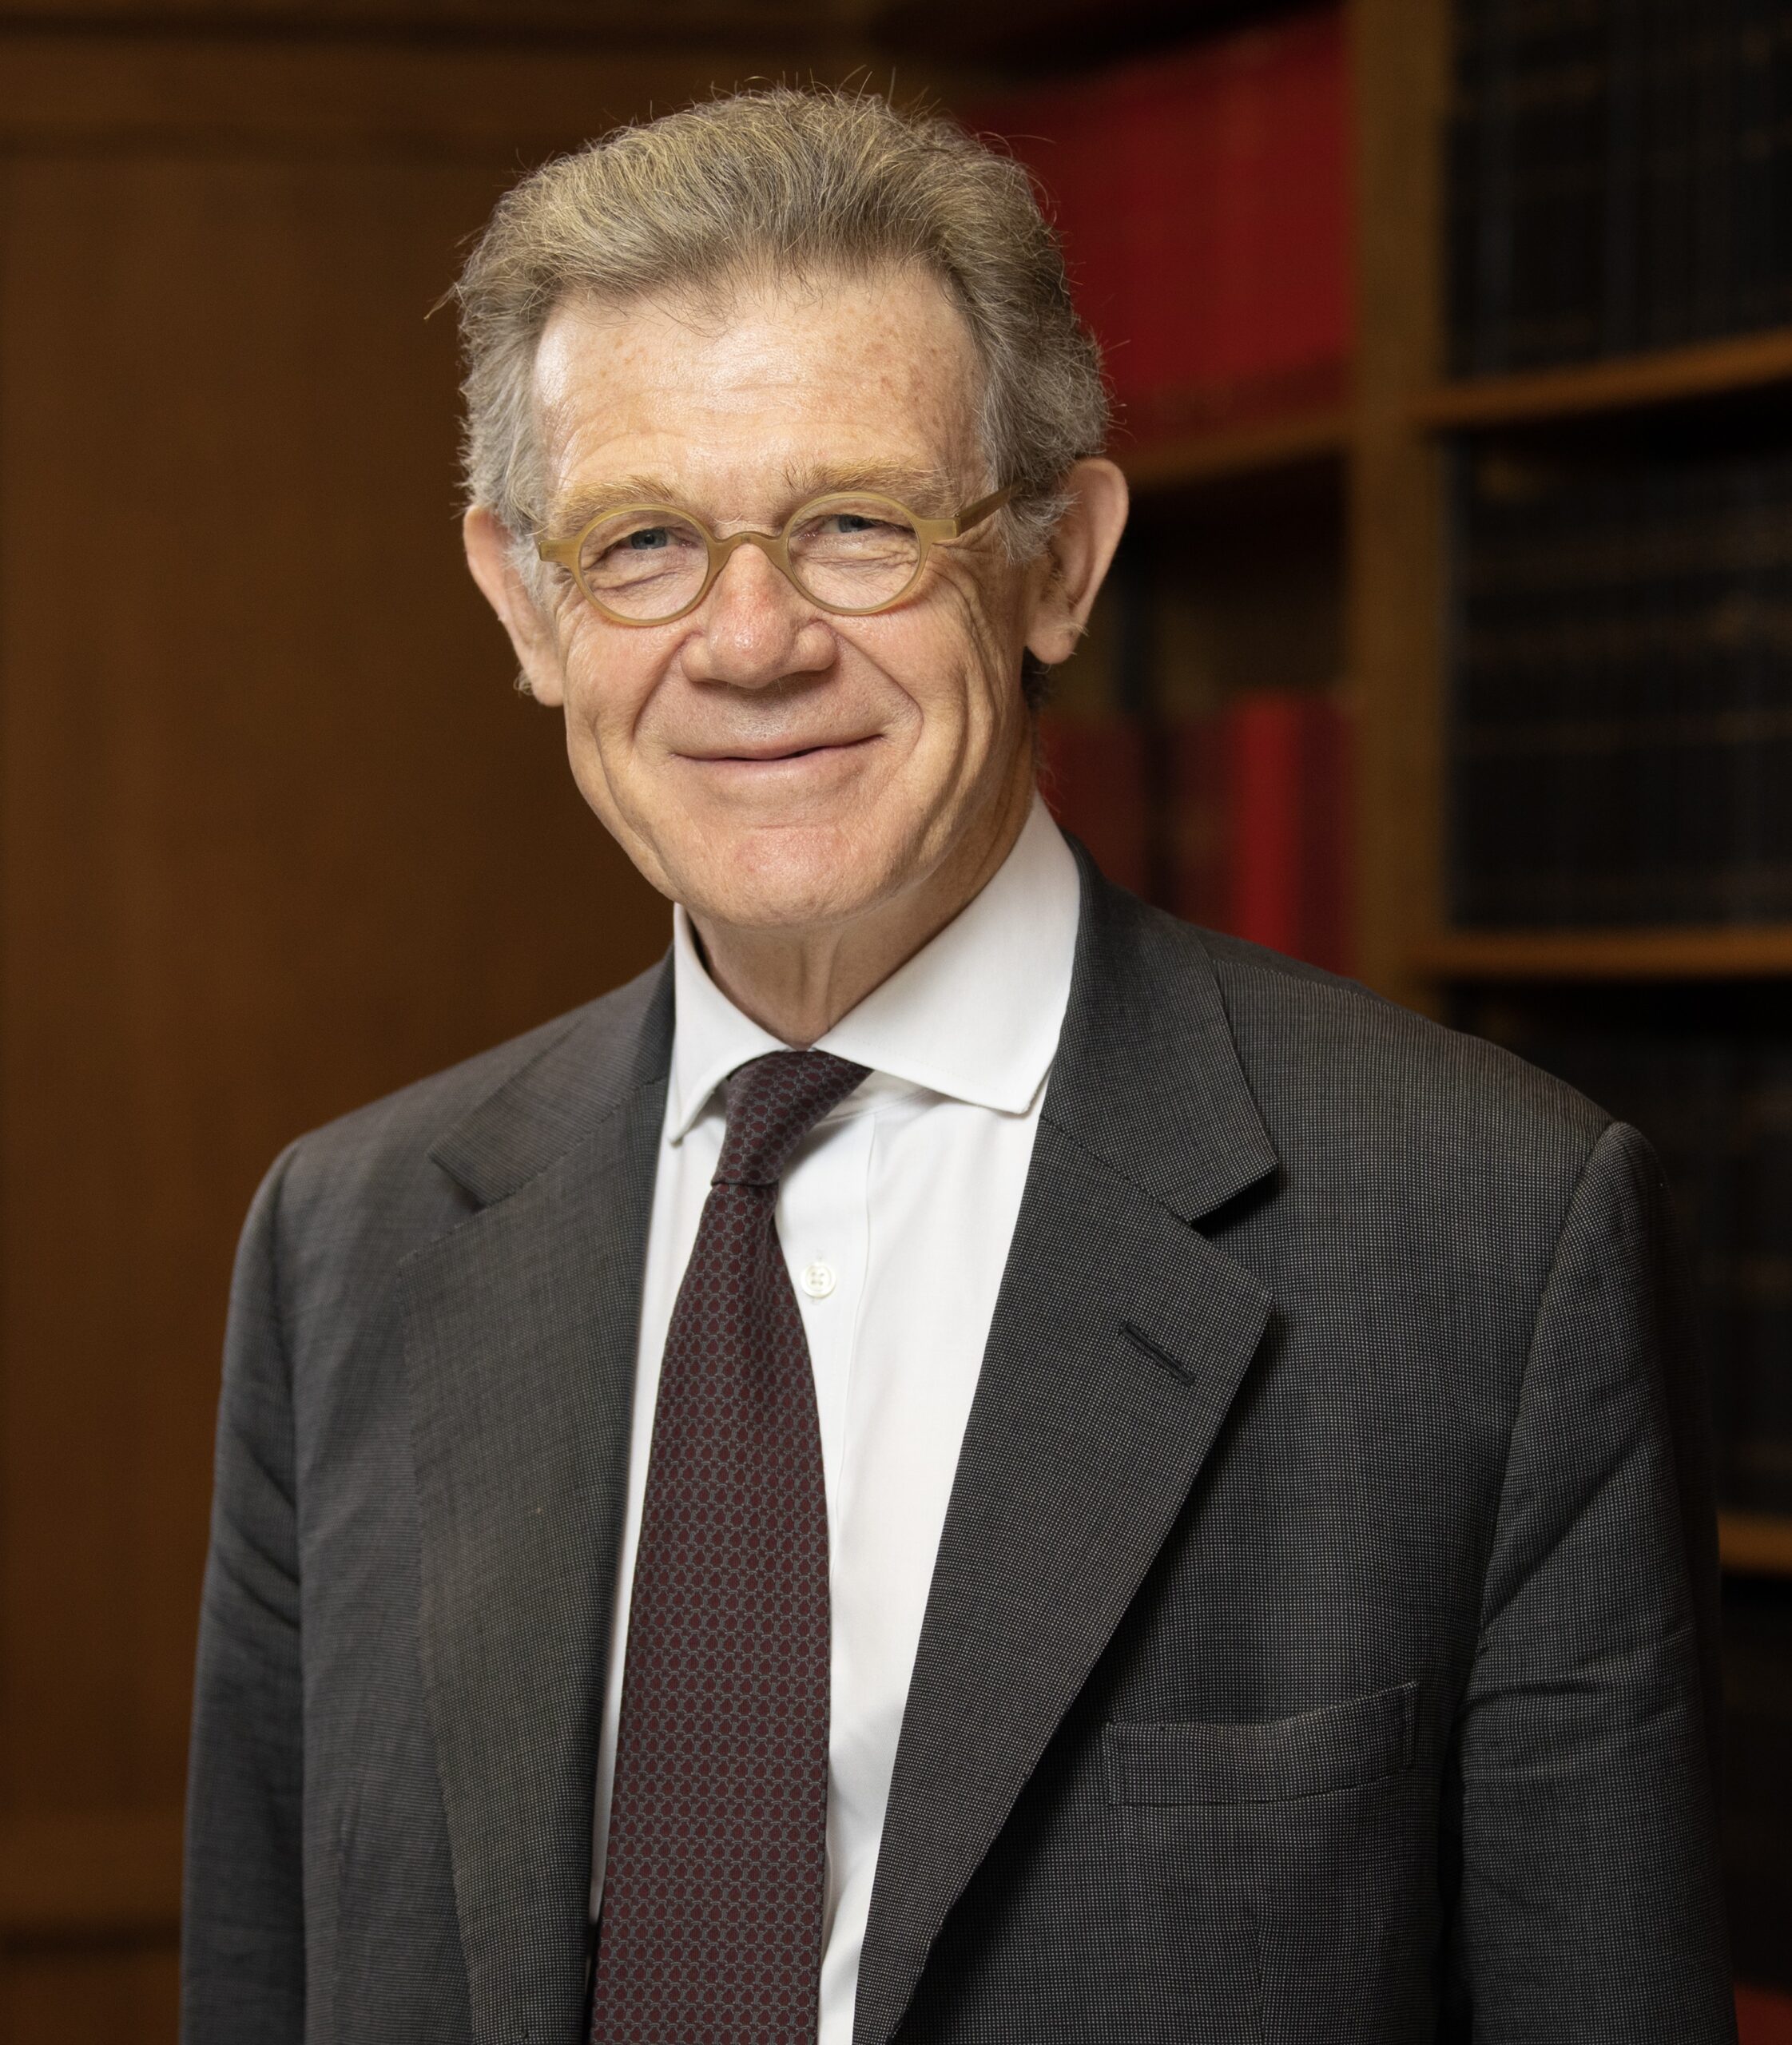 Portrait of the Rt Hon Sir Keith Lindblom. He is wearing a suit and smiling.